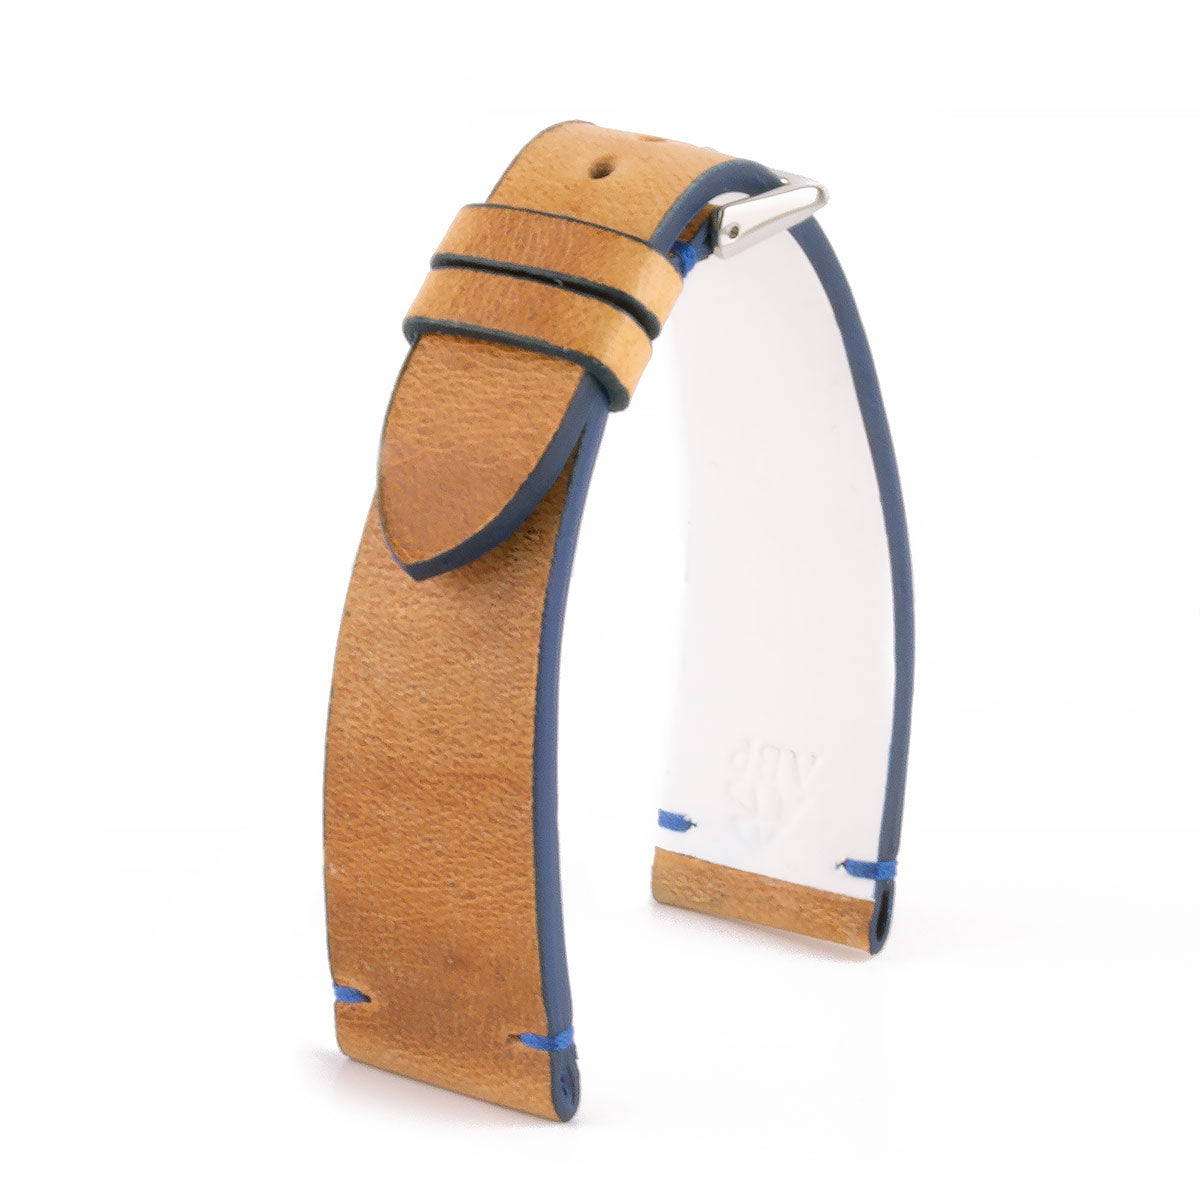 Tribute to Expo 2020 Dubai - Leather watch band - Alligator and camel (white / brown / blue)